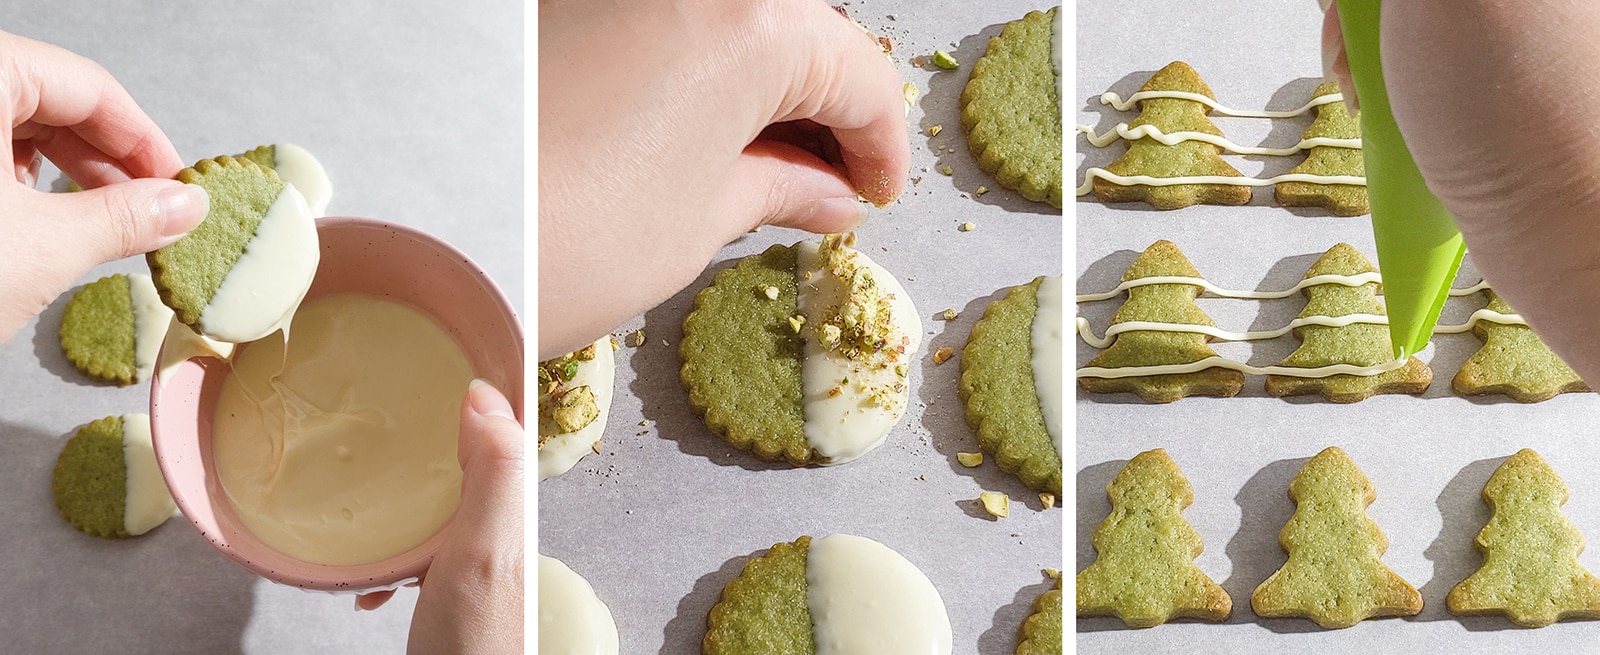 Dipping and decorating matcha cookies with melted white chocolate.